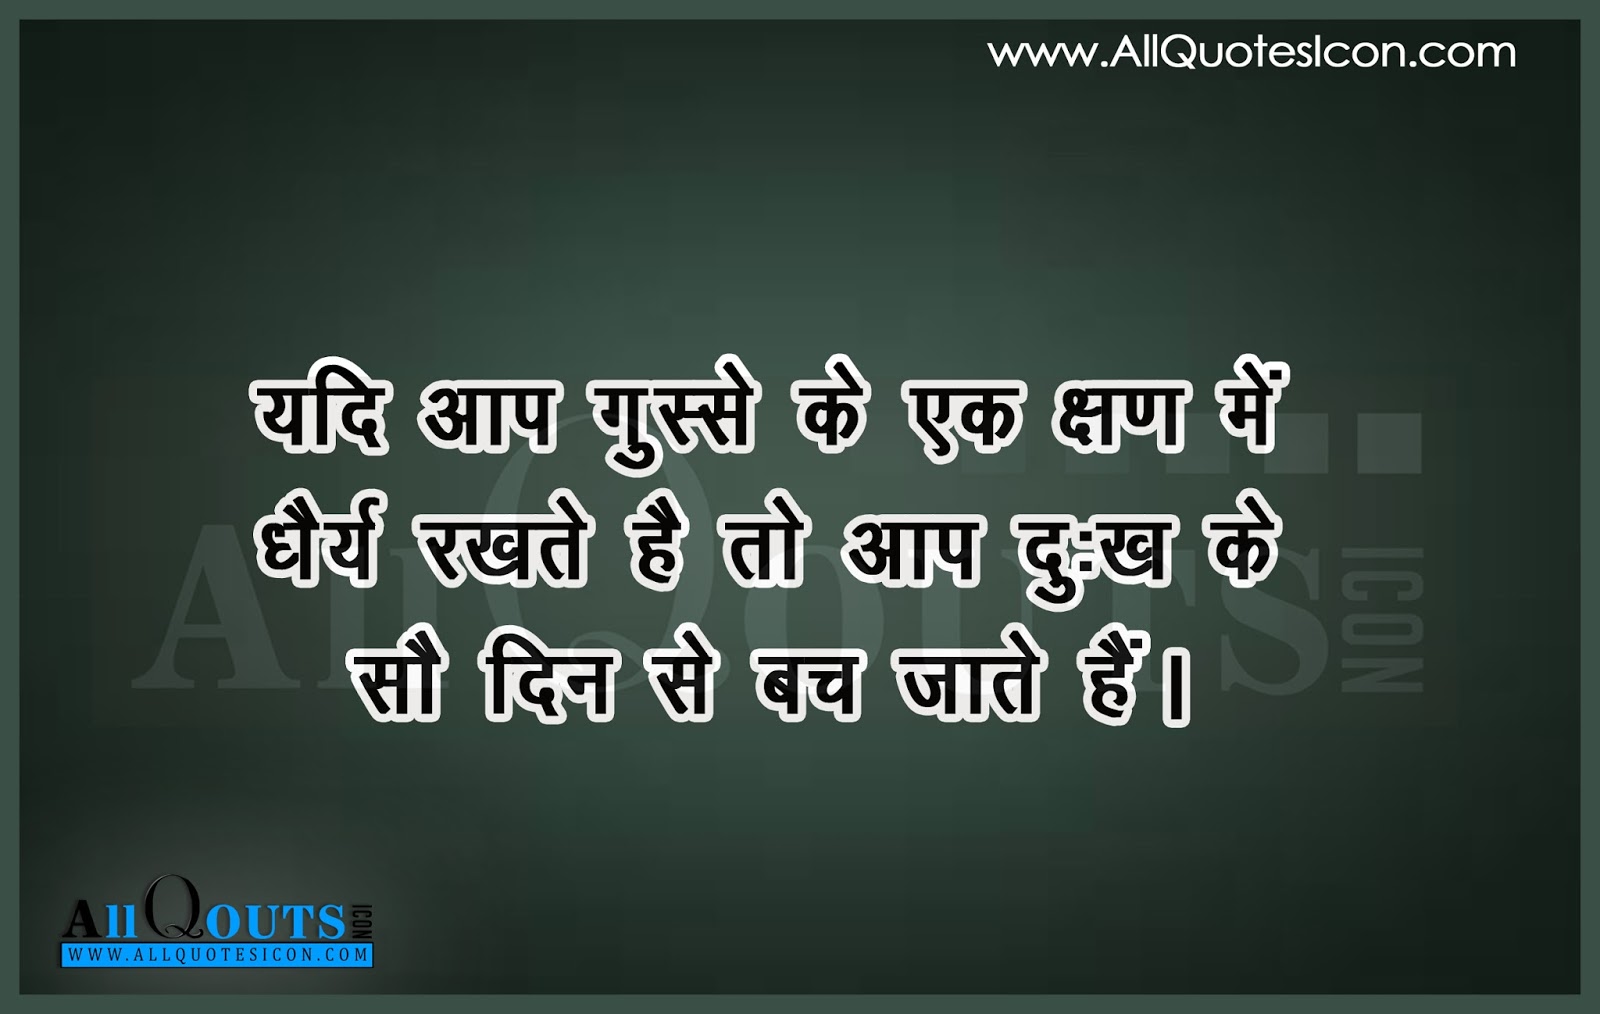 funny hindi quotes with pictures funny thoughts and images hd wallpapers best life inspiration